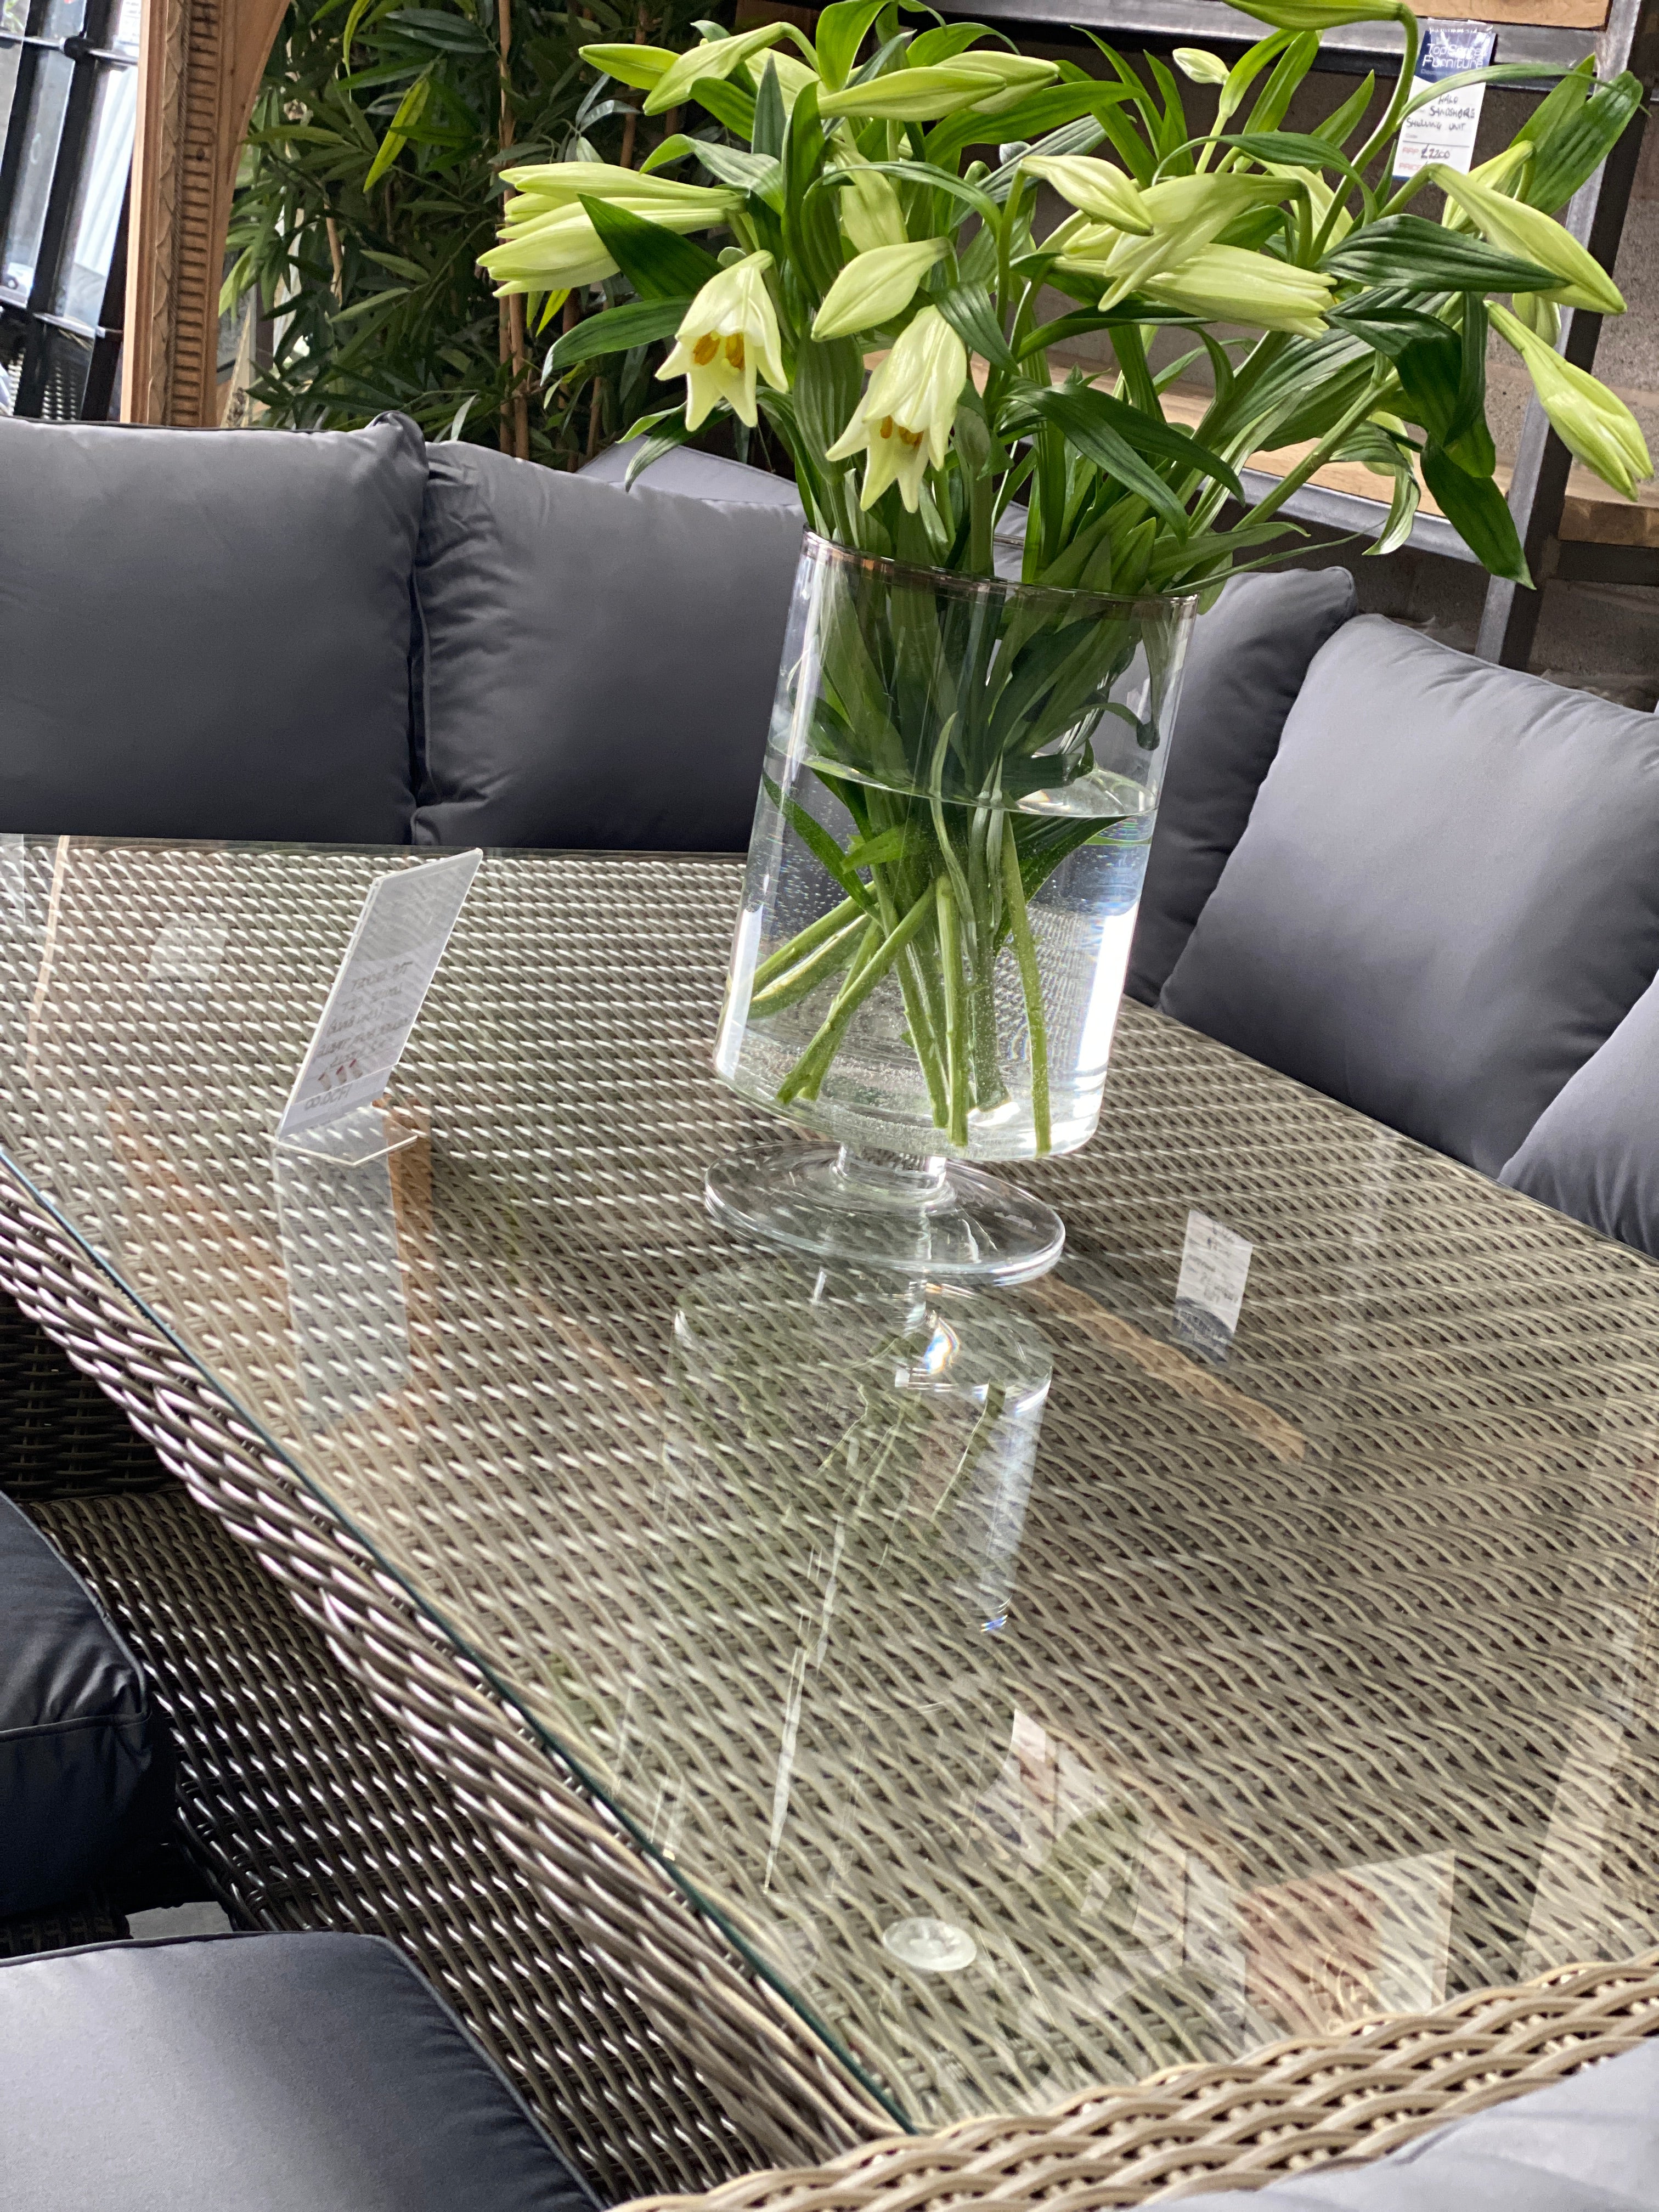 Rattan Garden Furniture for outdoor use or can be used for indoor Conservatory furniture